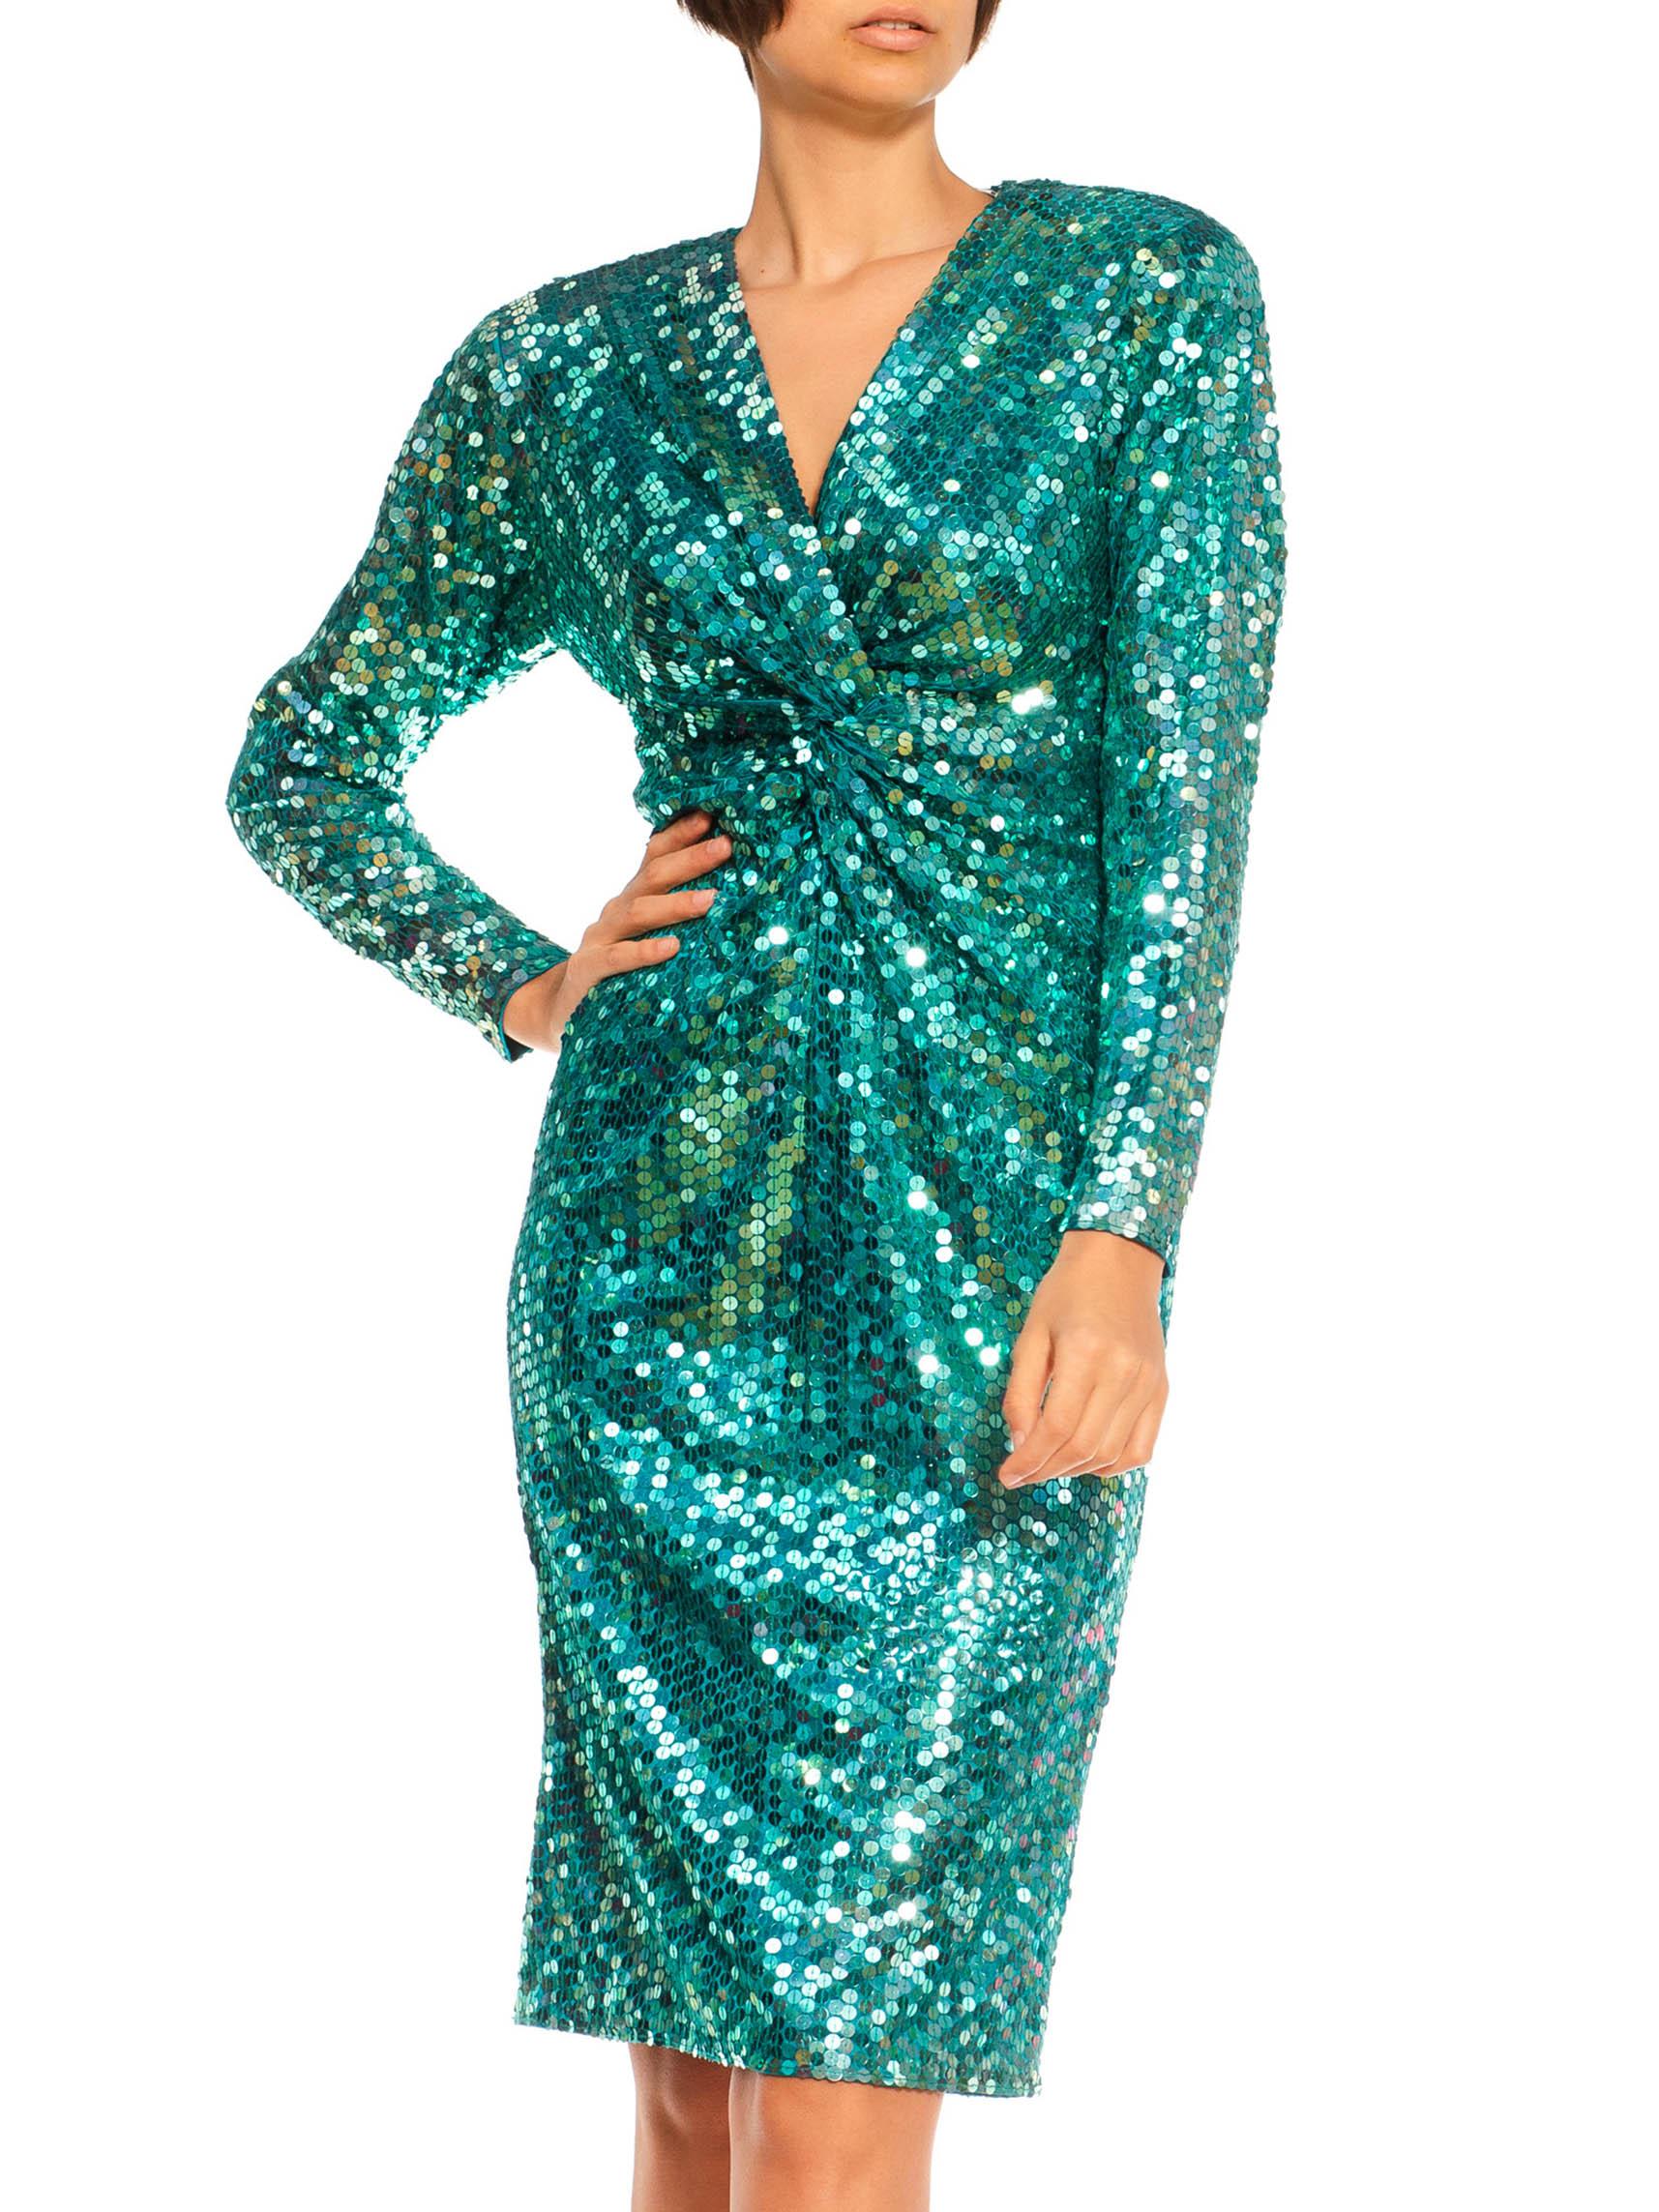 1980S Teal Sequined Poly/Viscose Jersey Low Cut & Long Sleeved Cocktail Dress For Sale 4